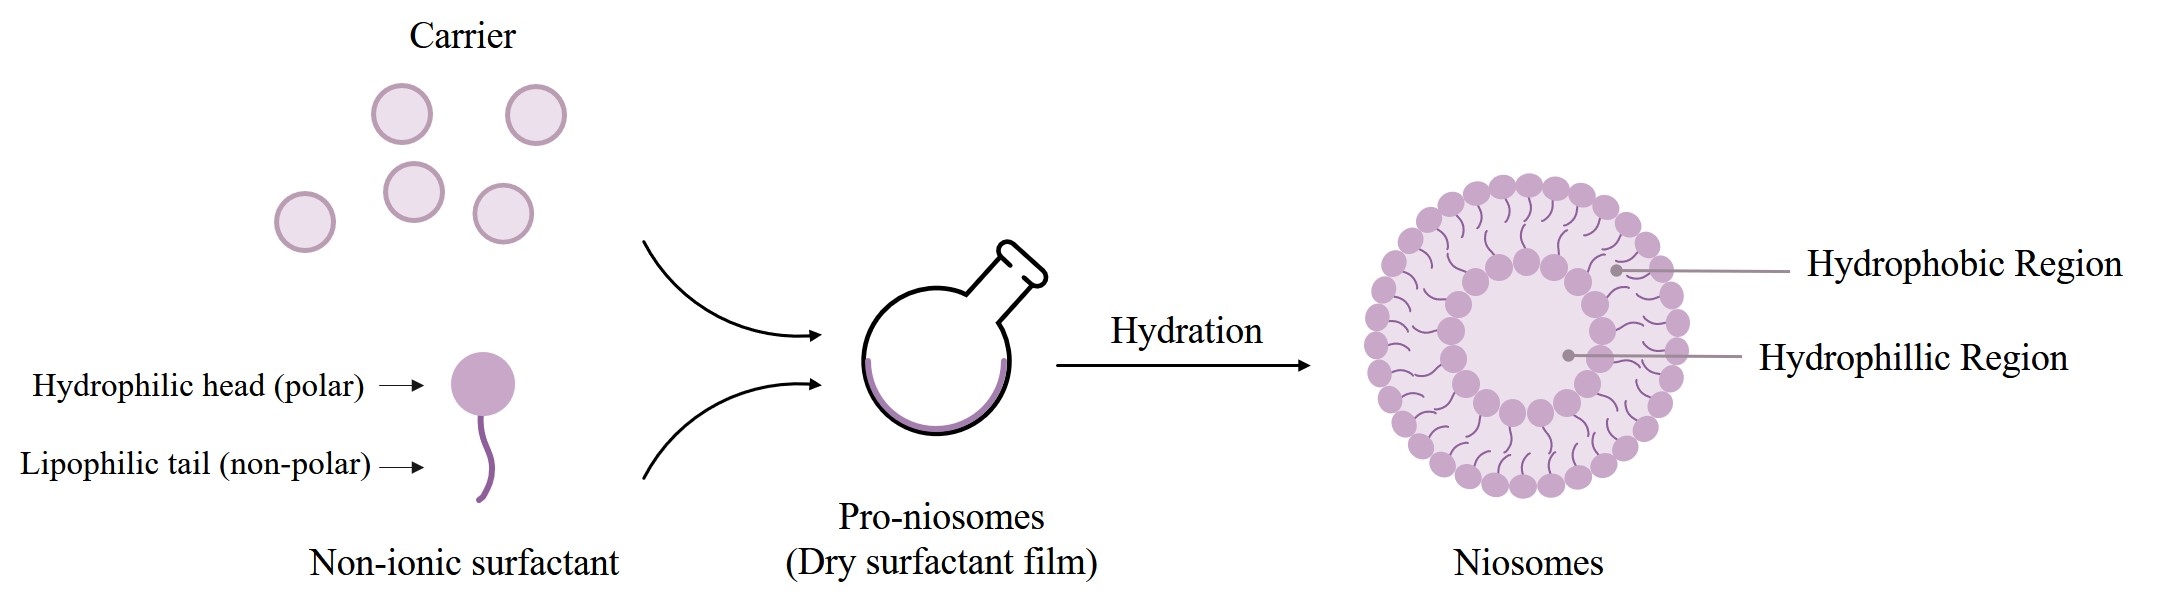 Fig.1 Niosomes formation from provesicular forms by hydration. (Creative Biolabs Original)